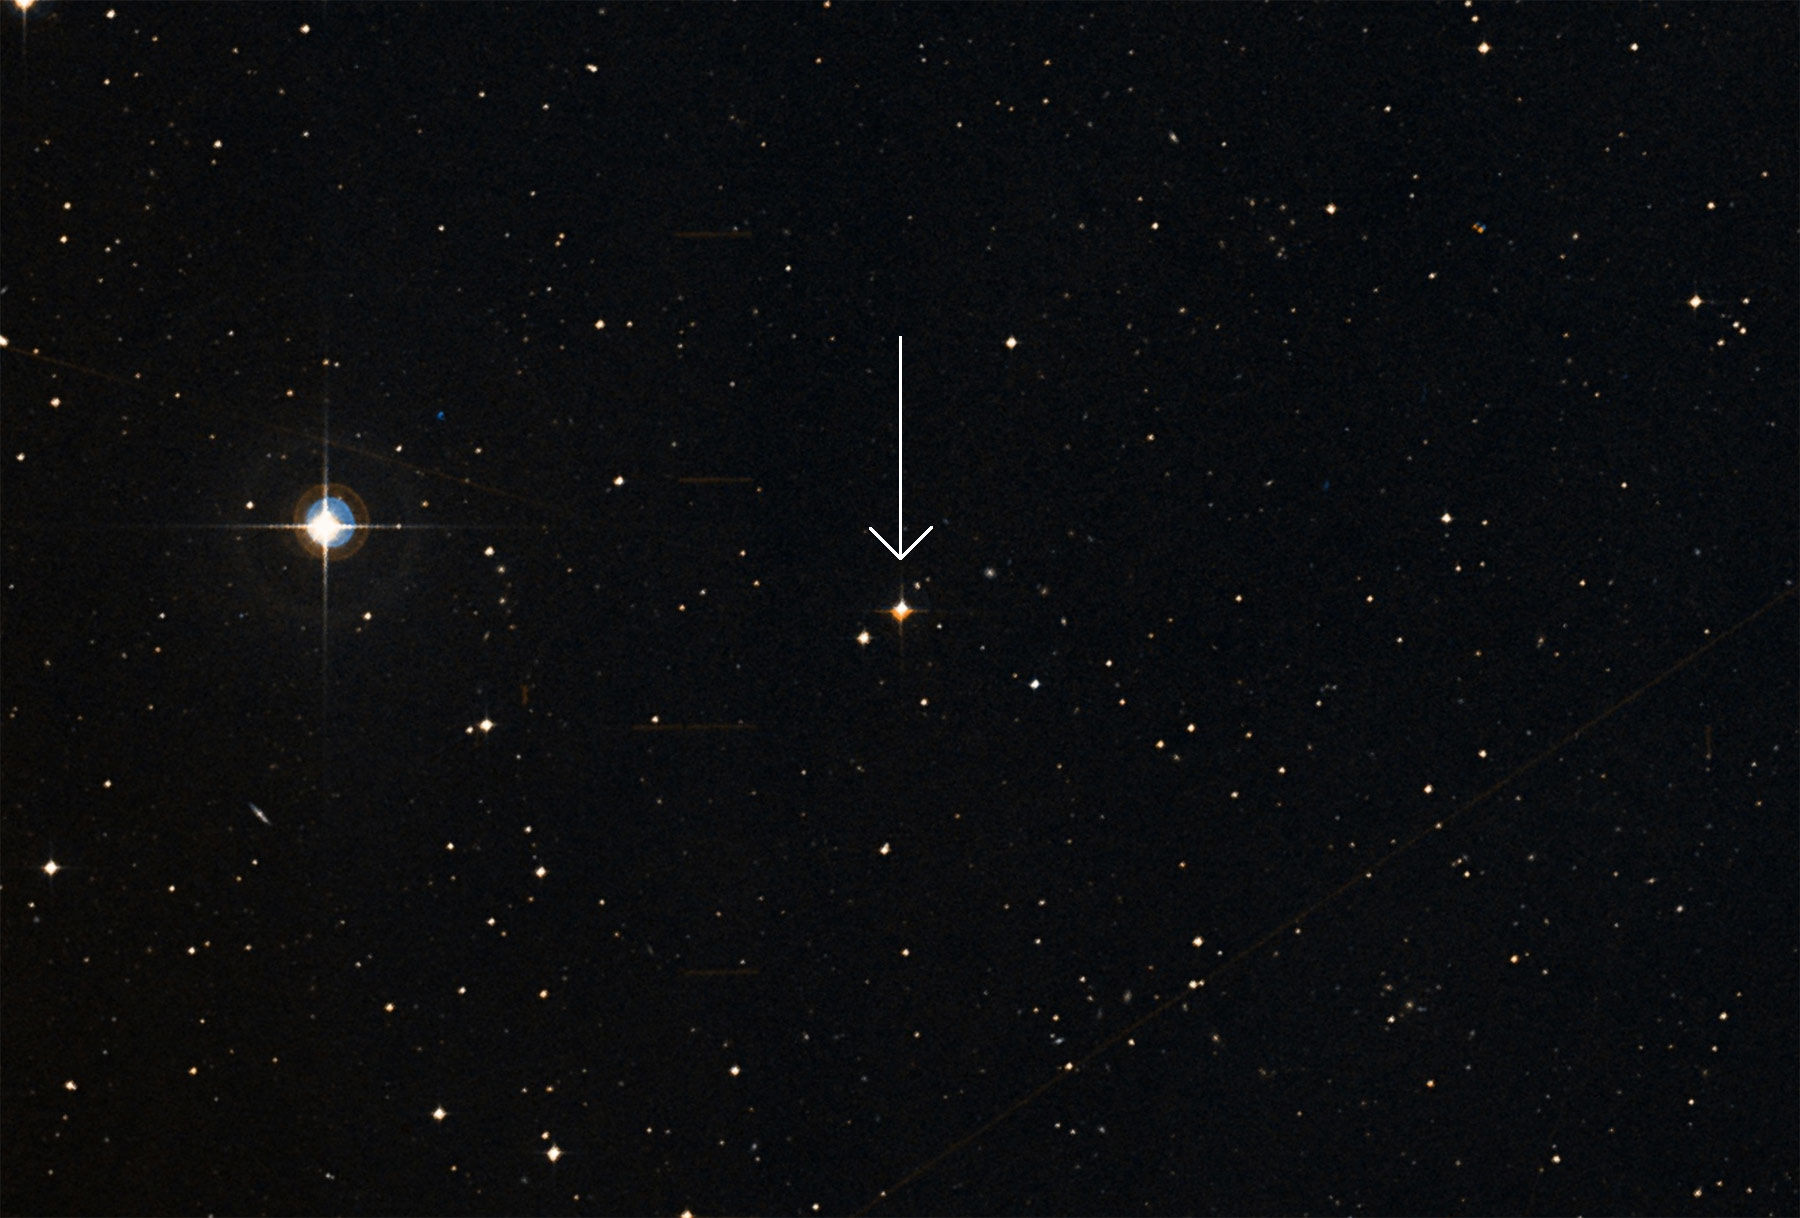 Ross 573 (arrowed), a red dwarf star, may be the home for the second known interstellar visitor to our solar system, the comet 2I/Borisov. Credit: SIMBAD/Aladin/DSS